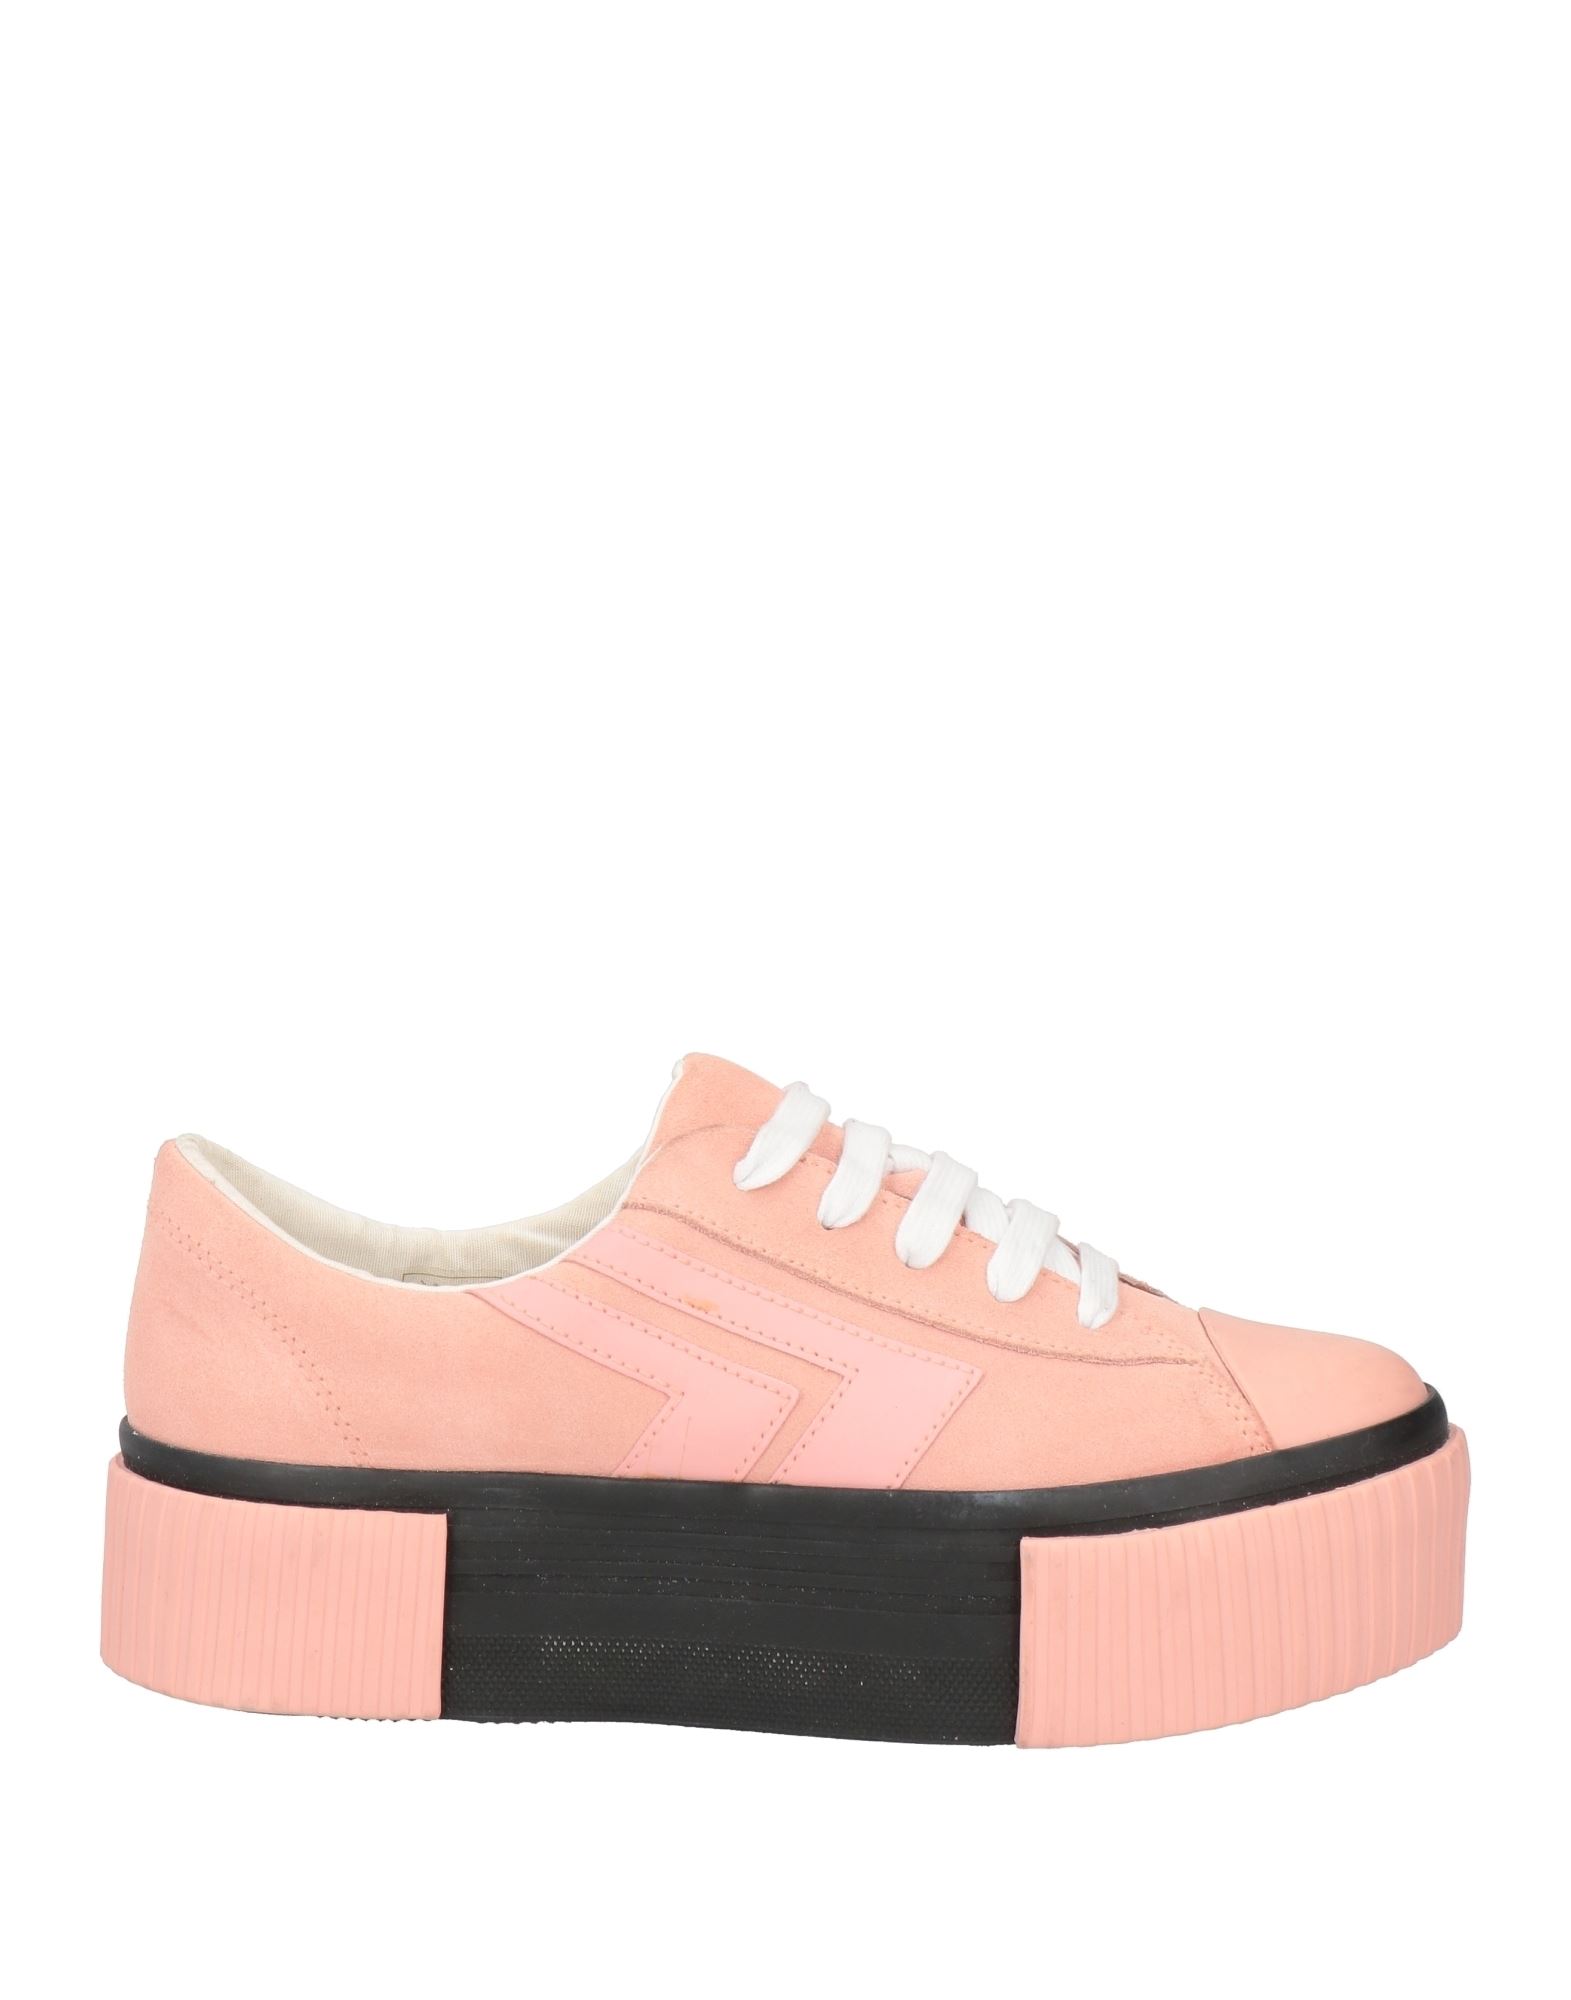 JC PLAY BY JEFFREY CAMPBELL SNEAKERS,11465677CG 11